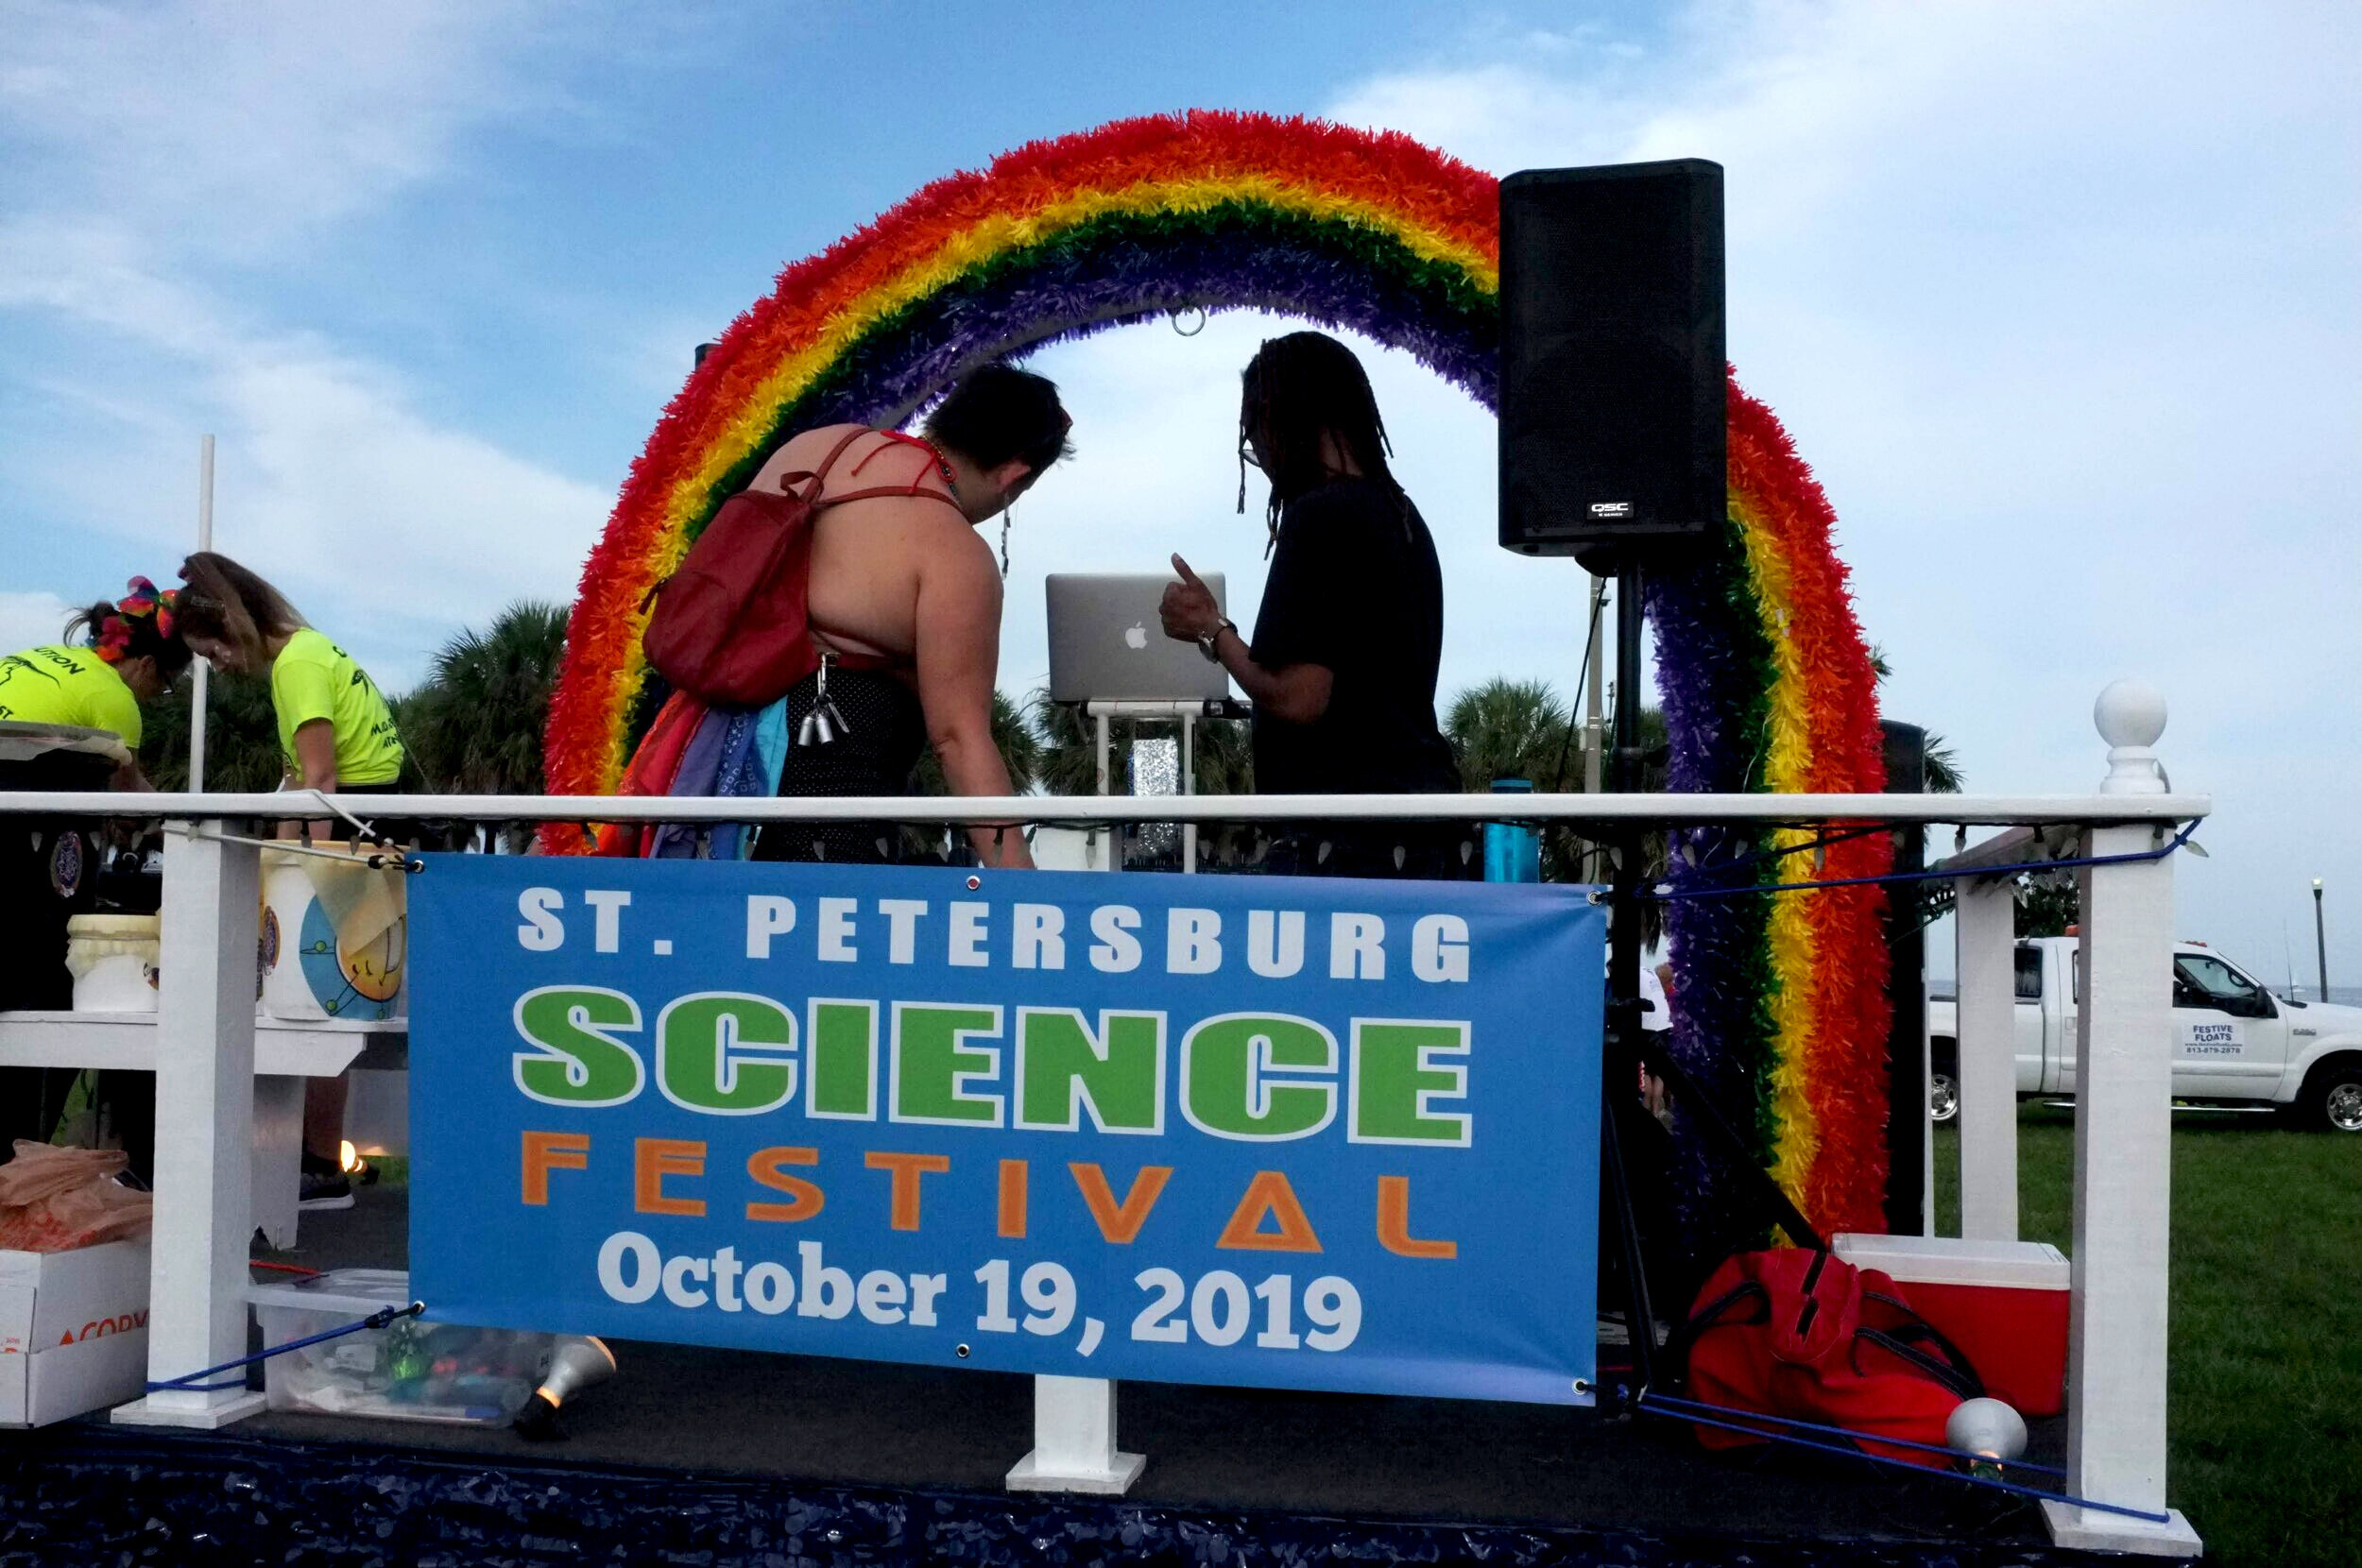  DJ setting up music for the St Pete science festival float at St Pete pride 